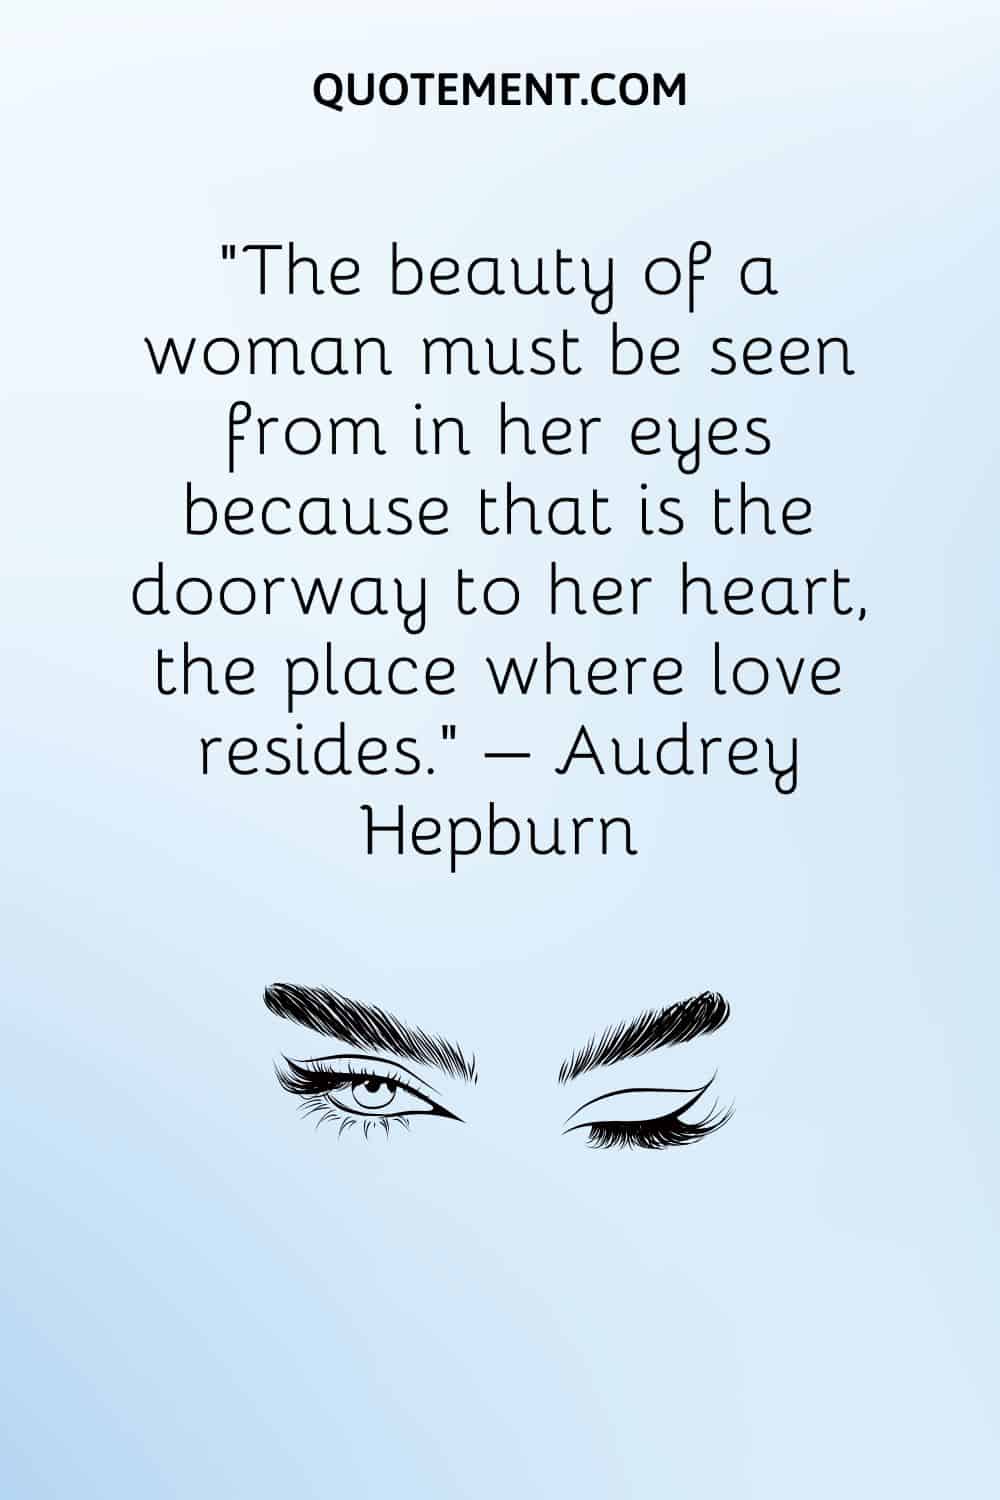 The beauty of a woman must be seen from in her eyes because that is the doorway to her heart, the place where love resides